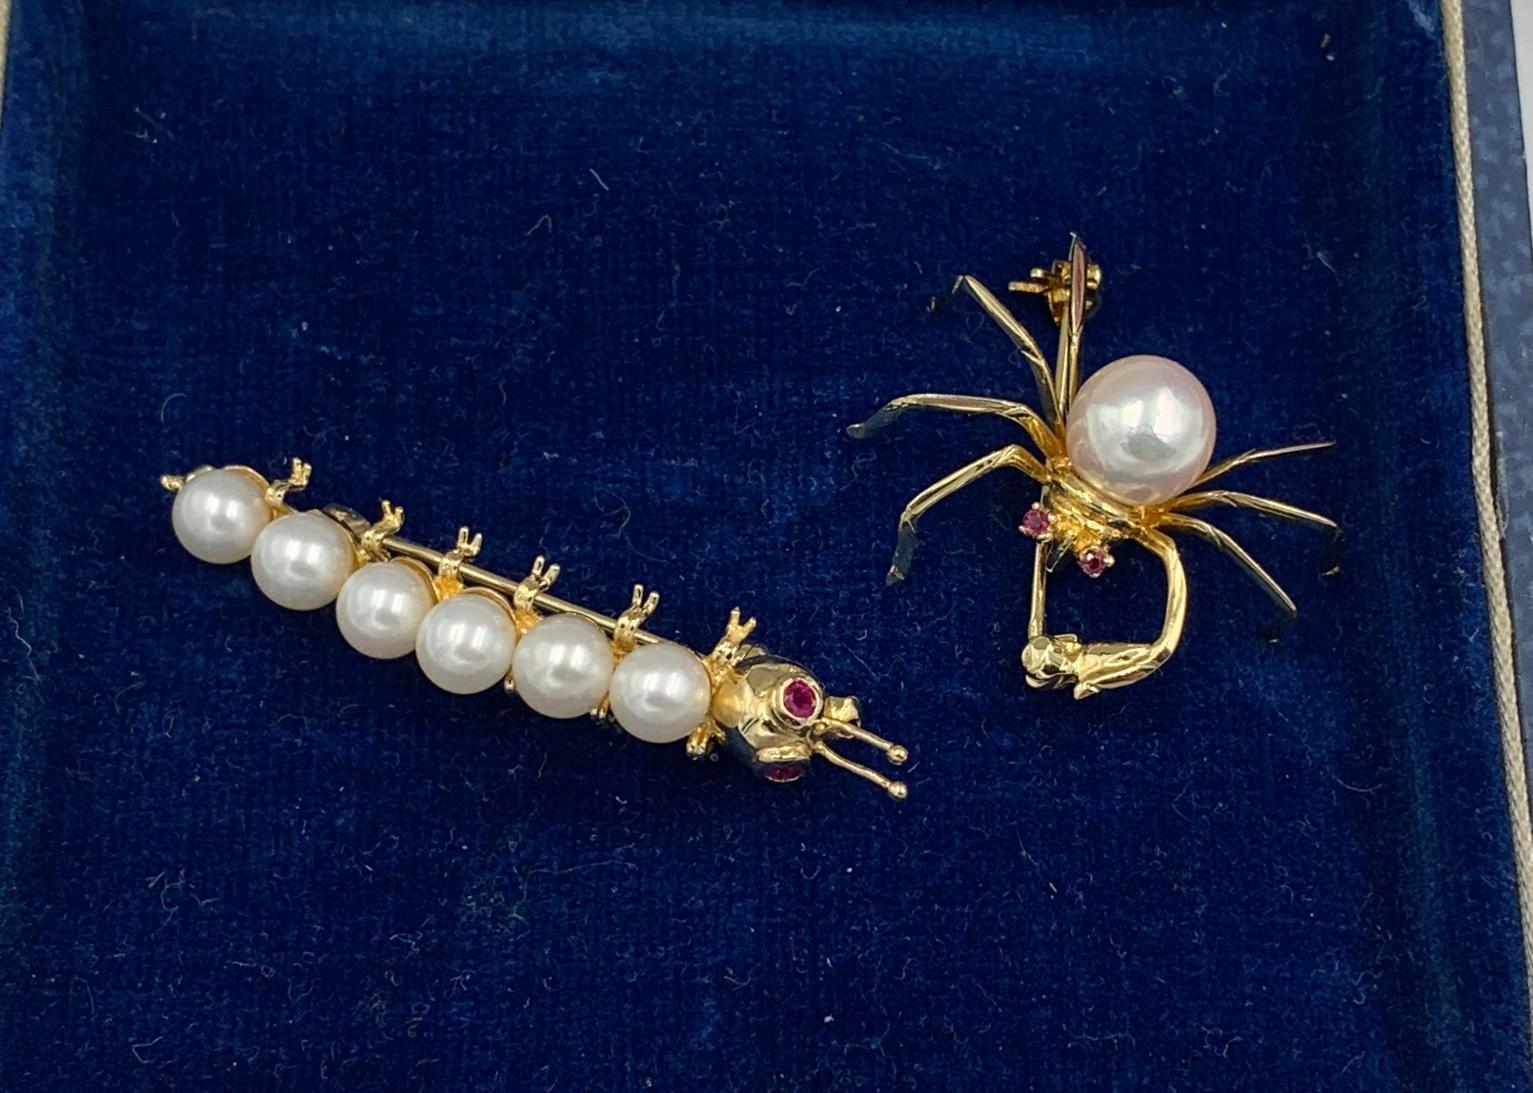 Contemporary Spider and Caterpillar Insect Brooch Pair of Pearl Ruby 14 Karat Gold Retro Pins